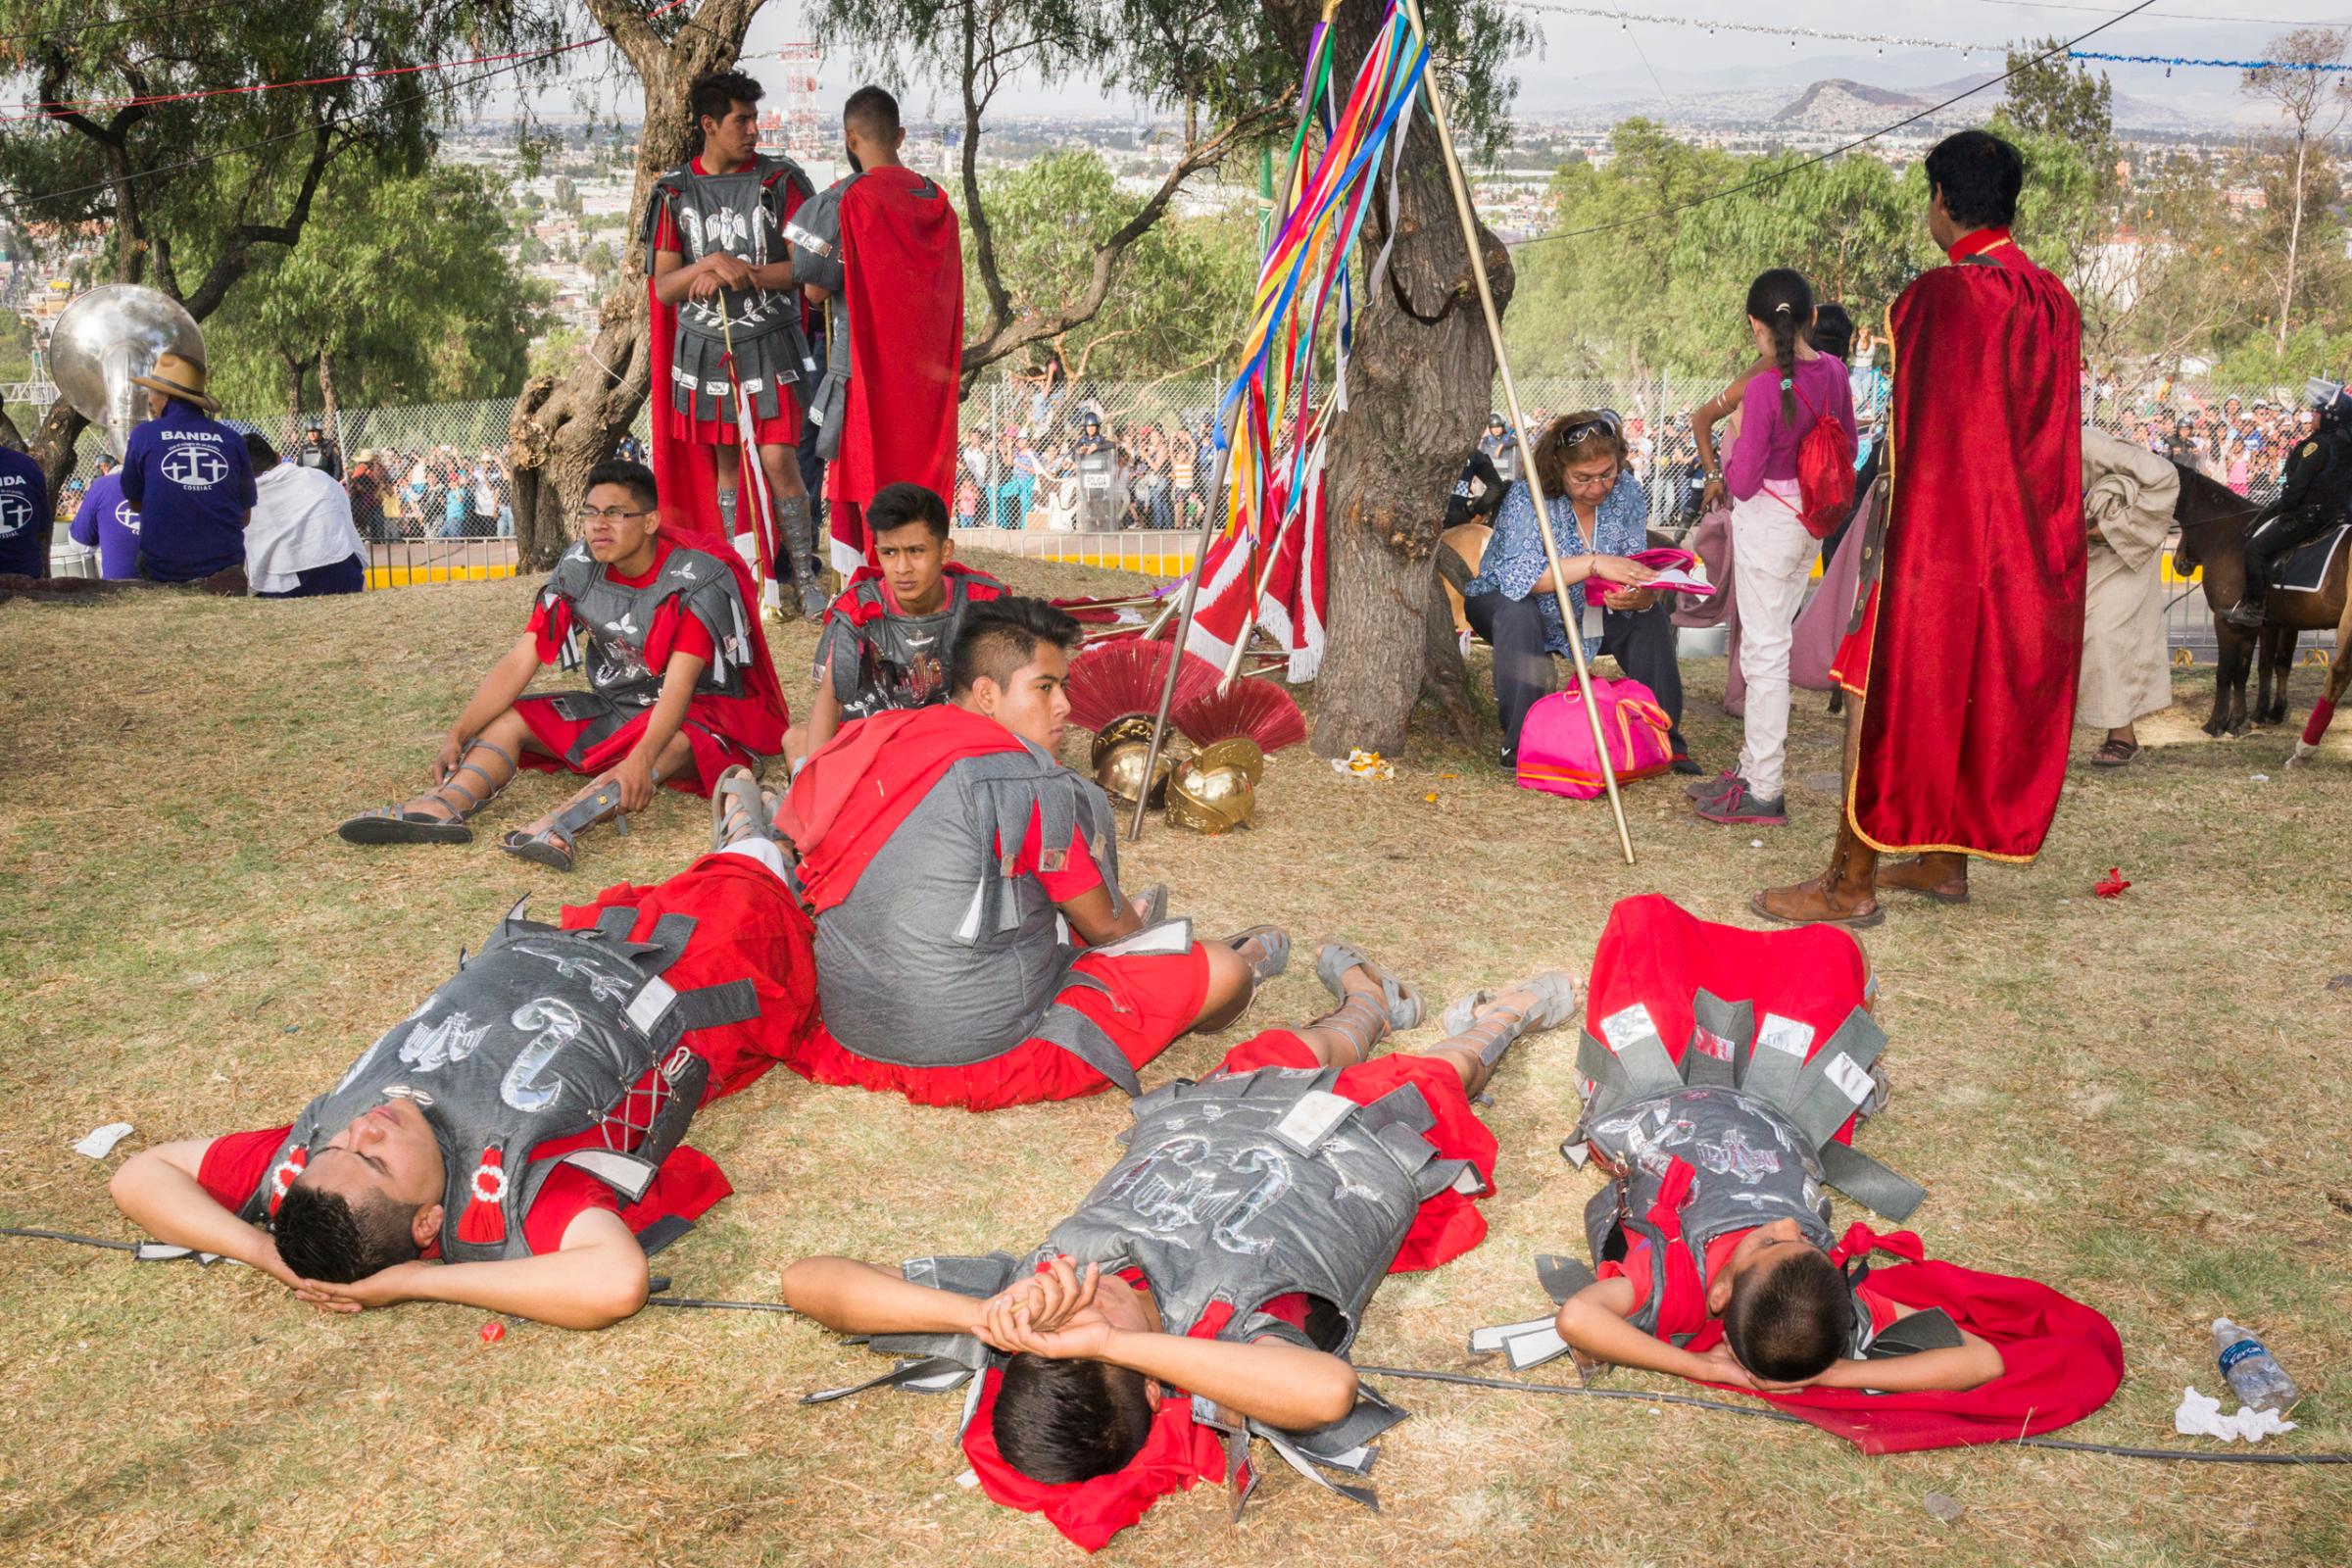 Actors playing the role of Roman soldiers rest after the reenactment of the Crucifixion of Jesus during Holy Week celebrations in Iztapalapa, Mexico.